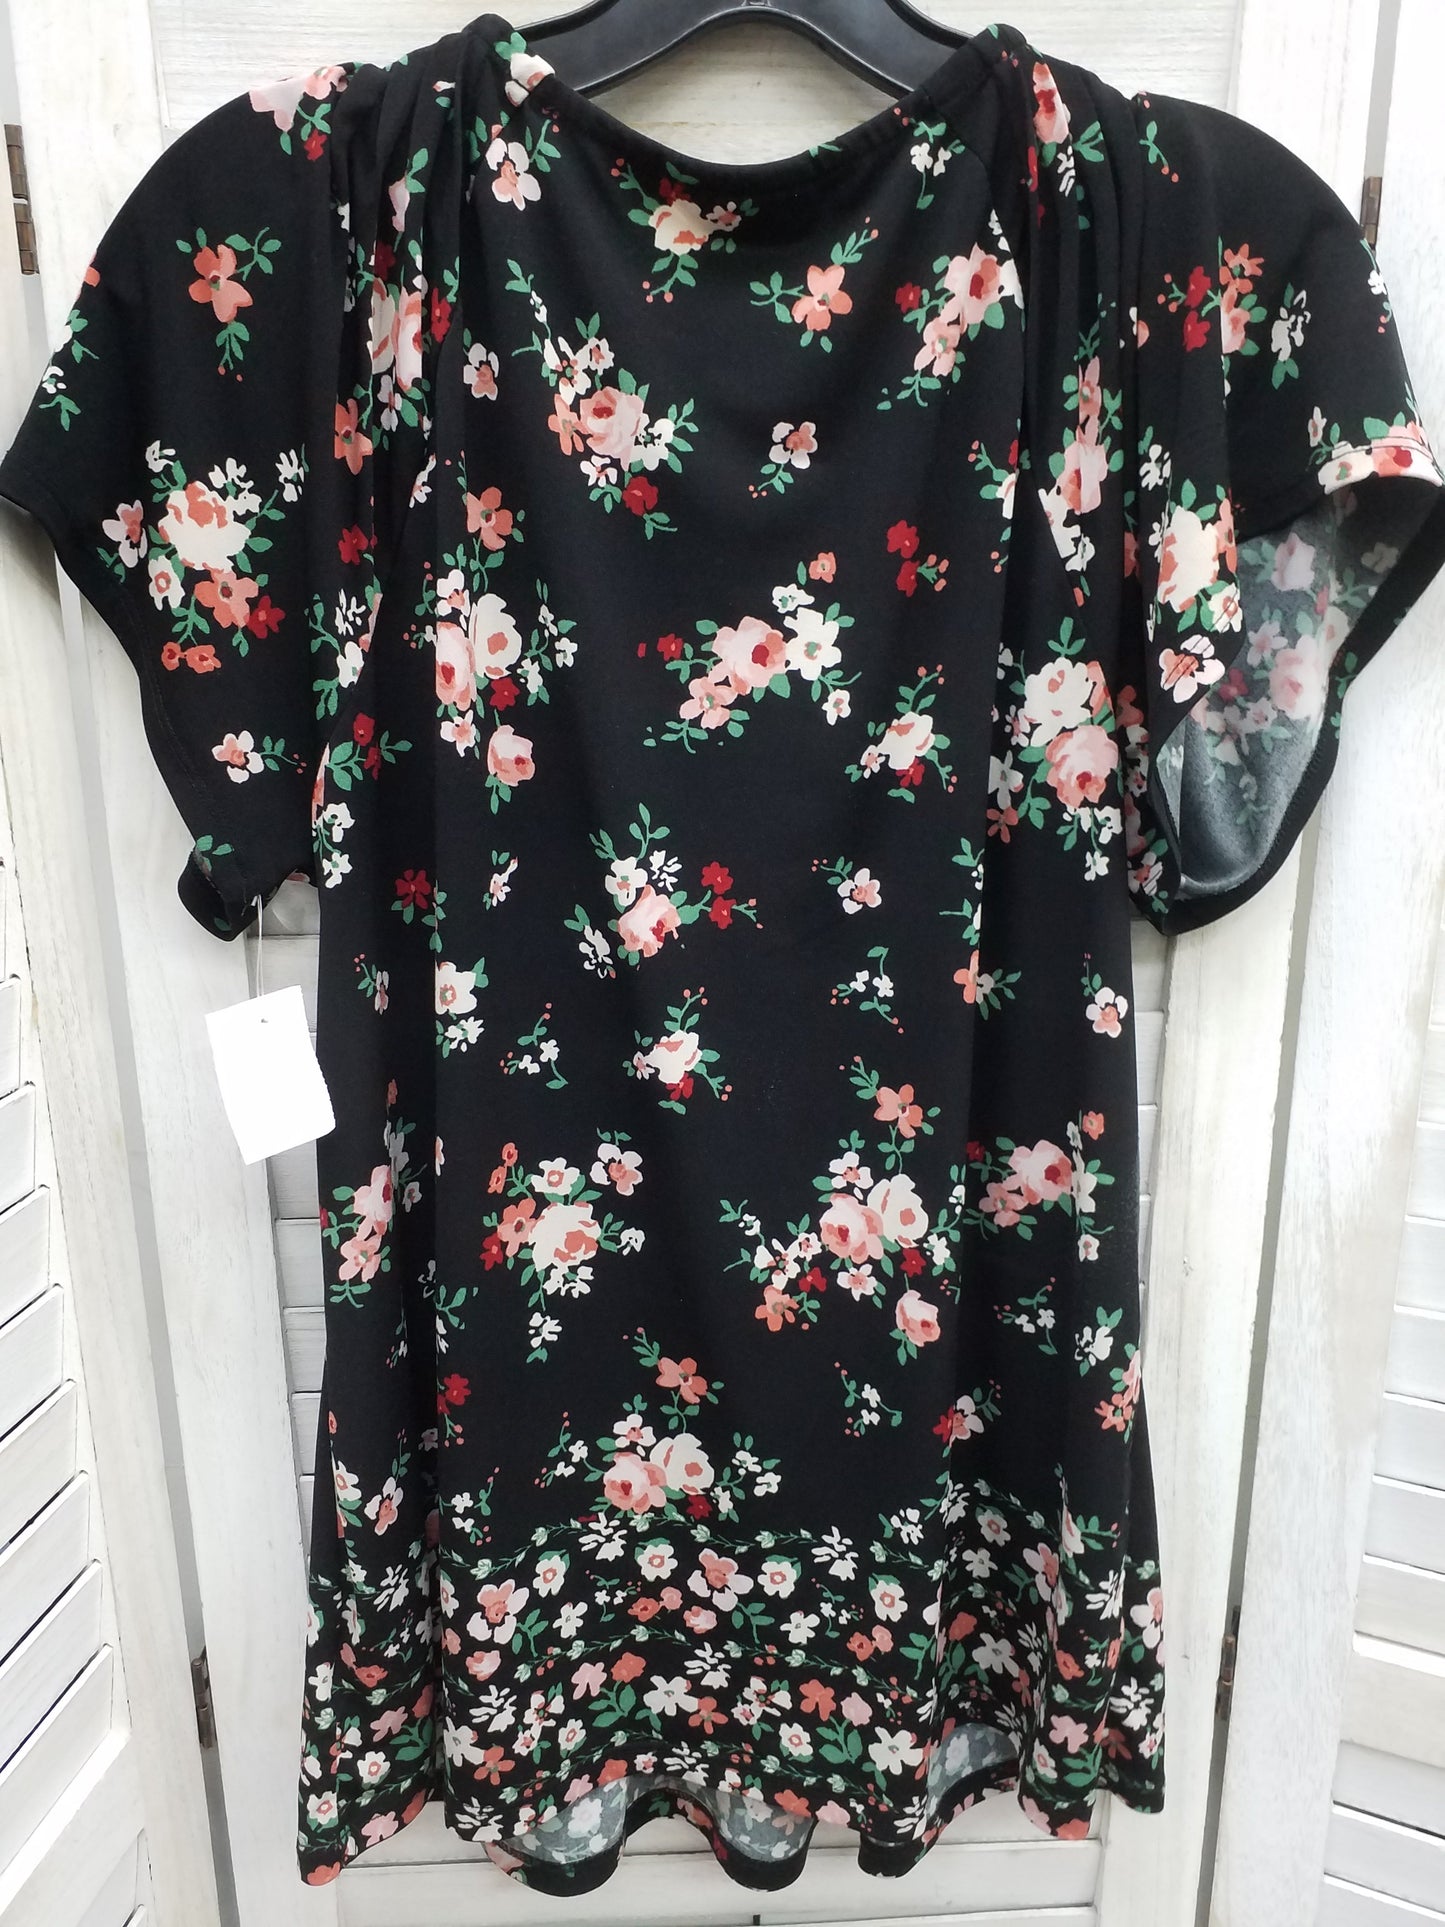 Floral Print Top Short Sleeve Basic Style And Company, Size L